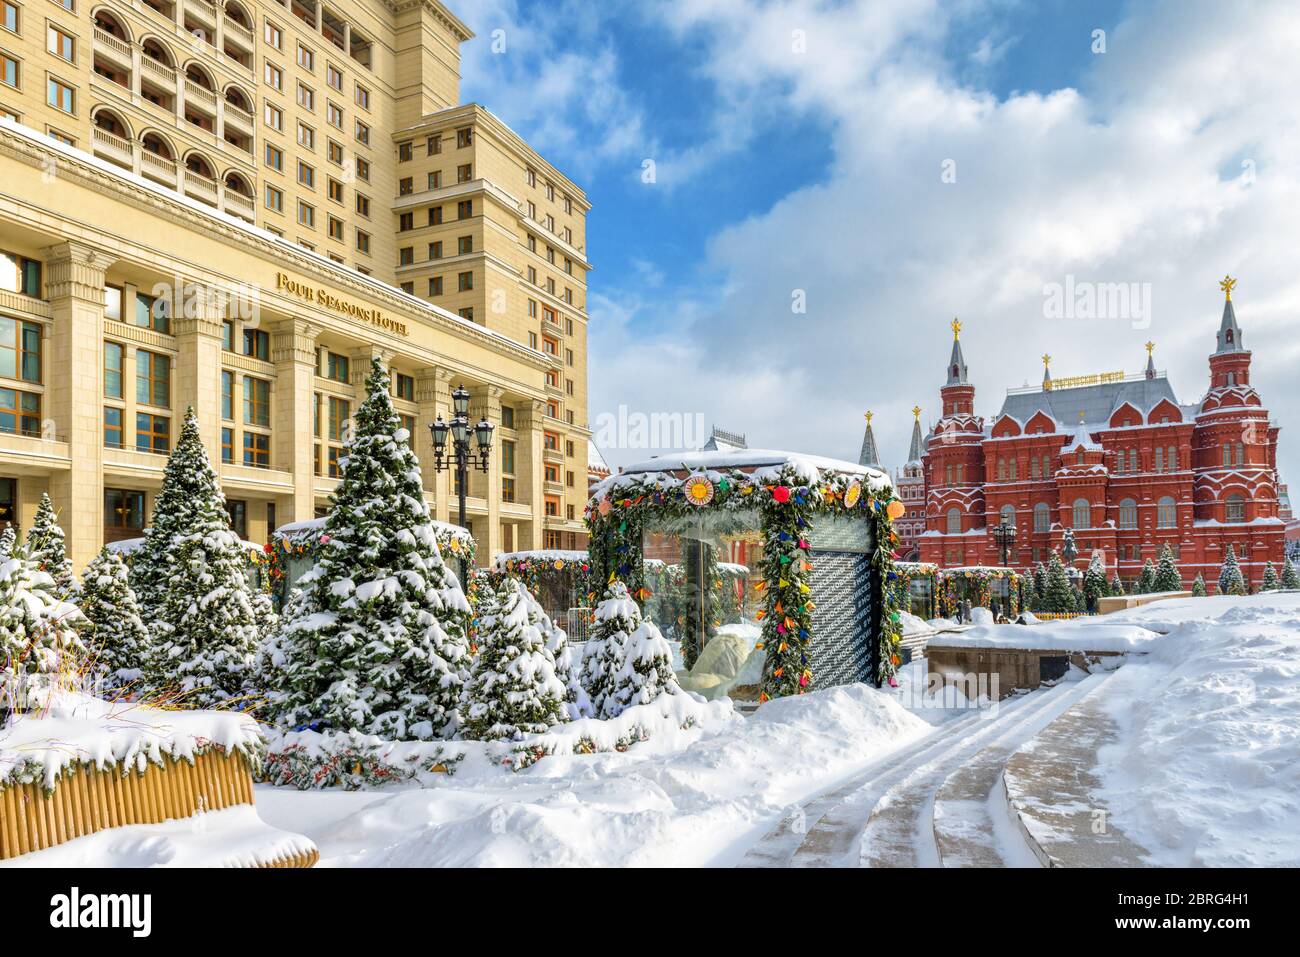 Moscow, Russia - February 5, 2018: Manezhnaya or Manege Square near Moscow Kremlin in winter. Four Seasons hotel in the left. Beautiful central Moscow Stock Photo